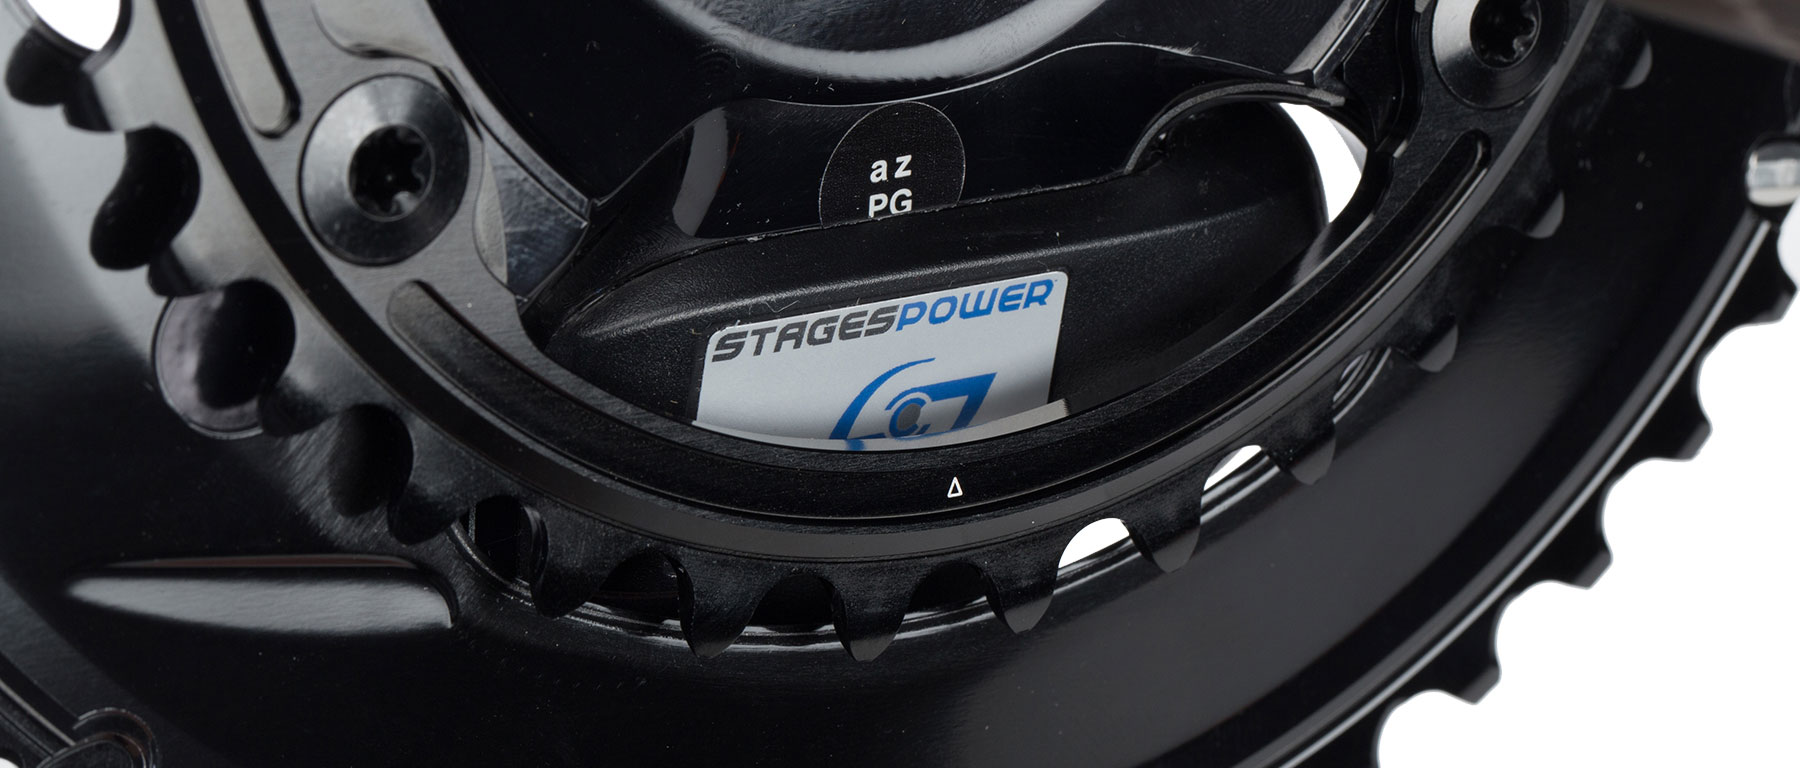 Stages Power LR Dura-Ace R9100 Meter